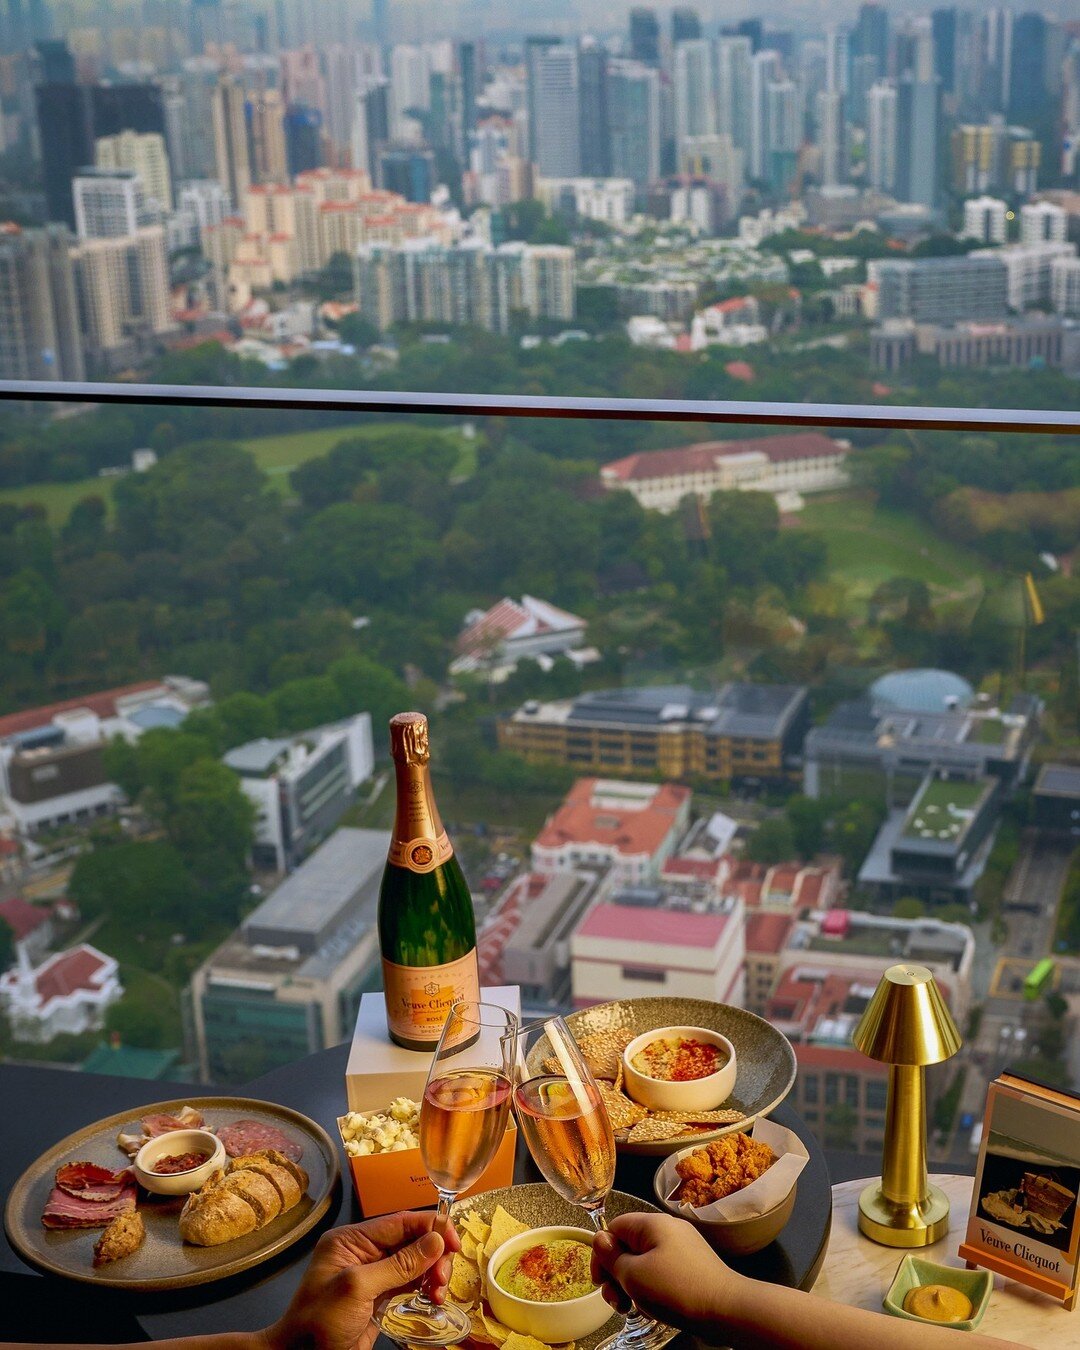 Looking for the perfect way to unwind after a long day? Head over to SKAI Bar and indulge in a glass of Veuve Clicquot, perfectly paired with our savory bar bites and a breathtaking view of the Singapore city skyline.⁣⁣
⁣⁣
Sip on the finest champagne